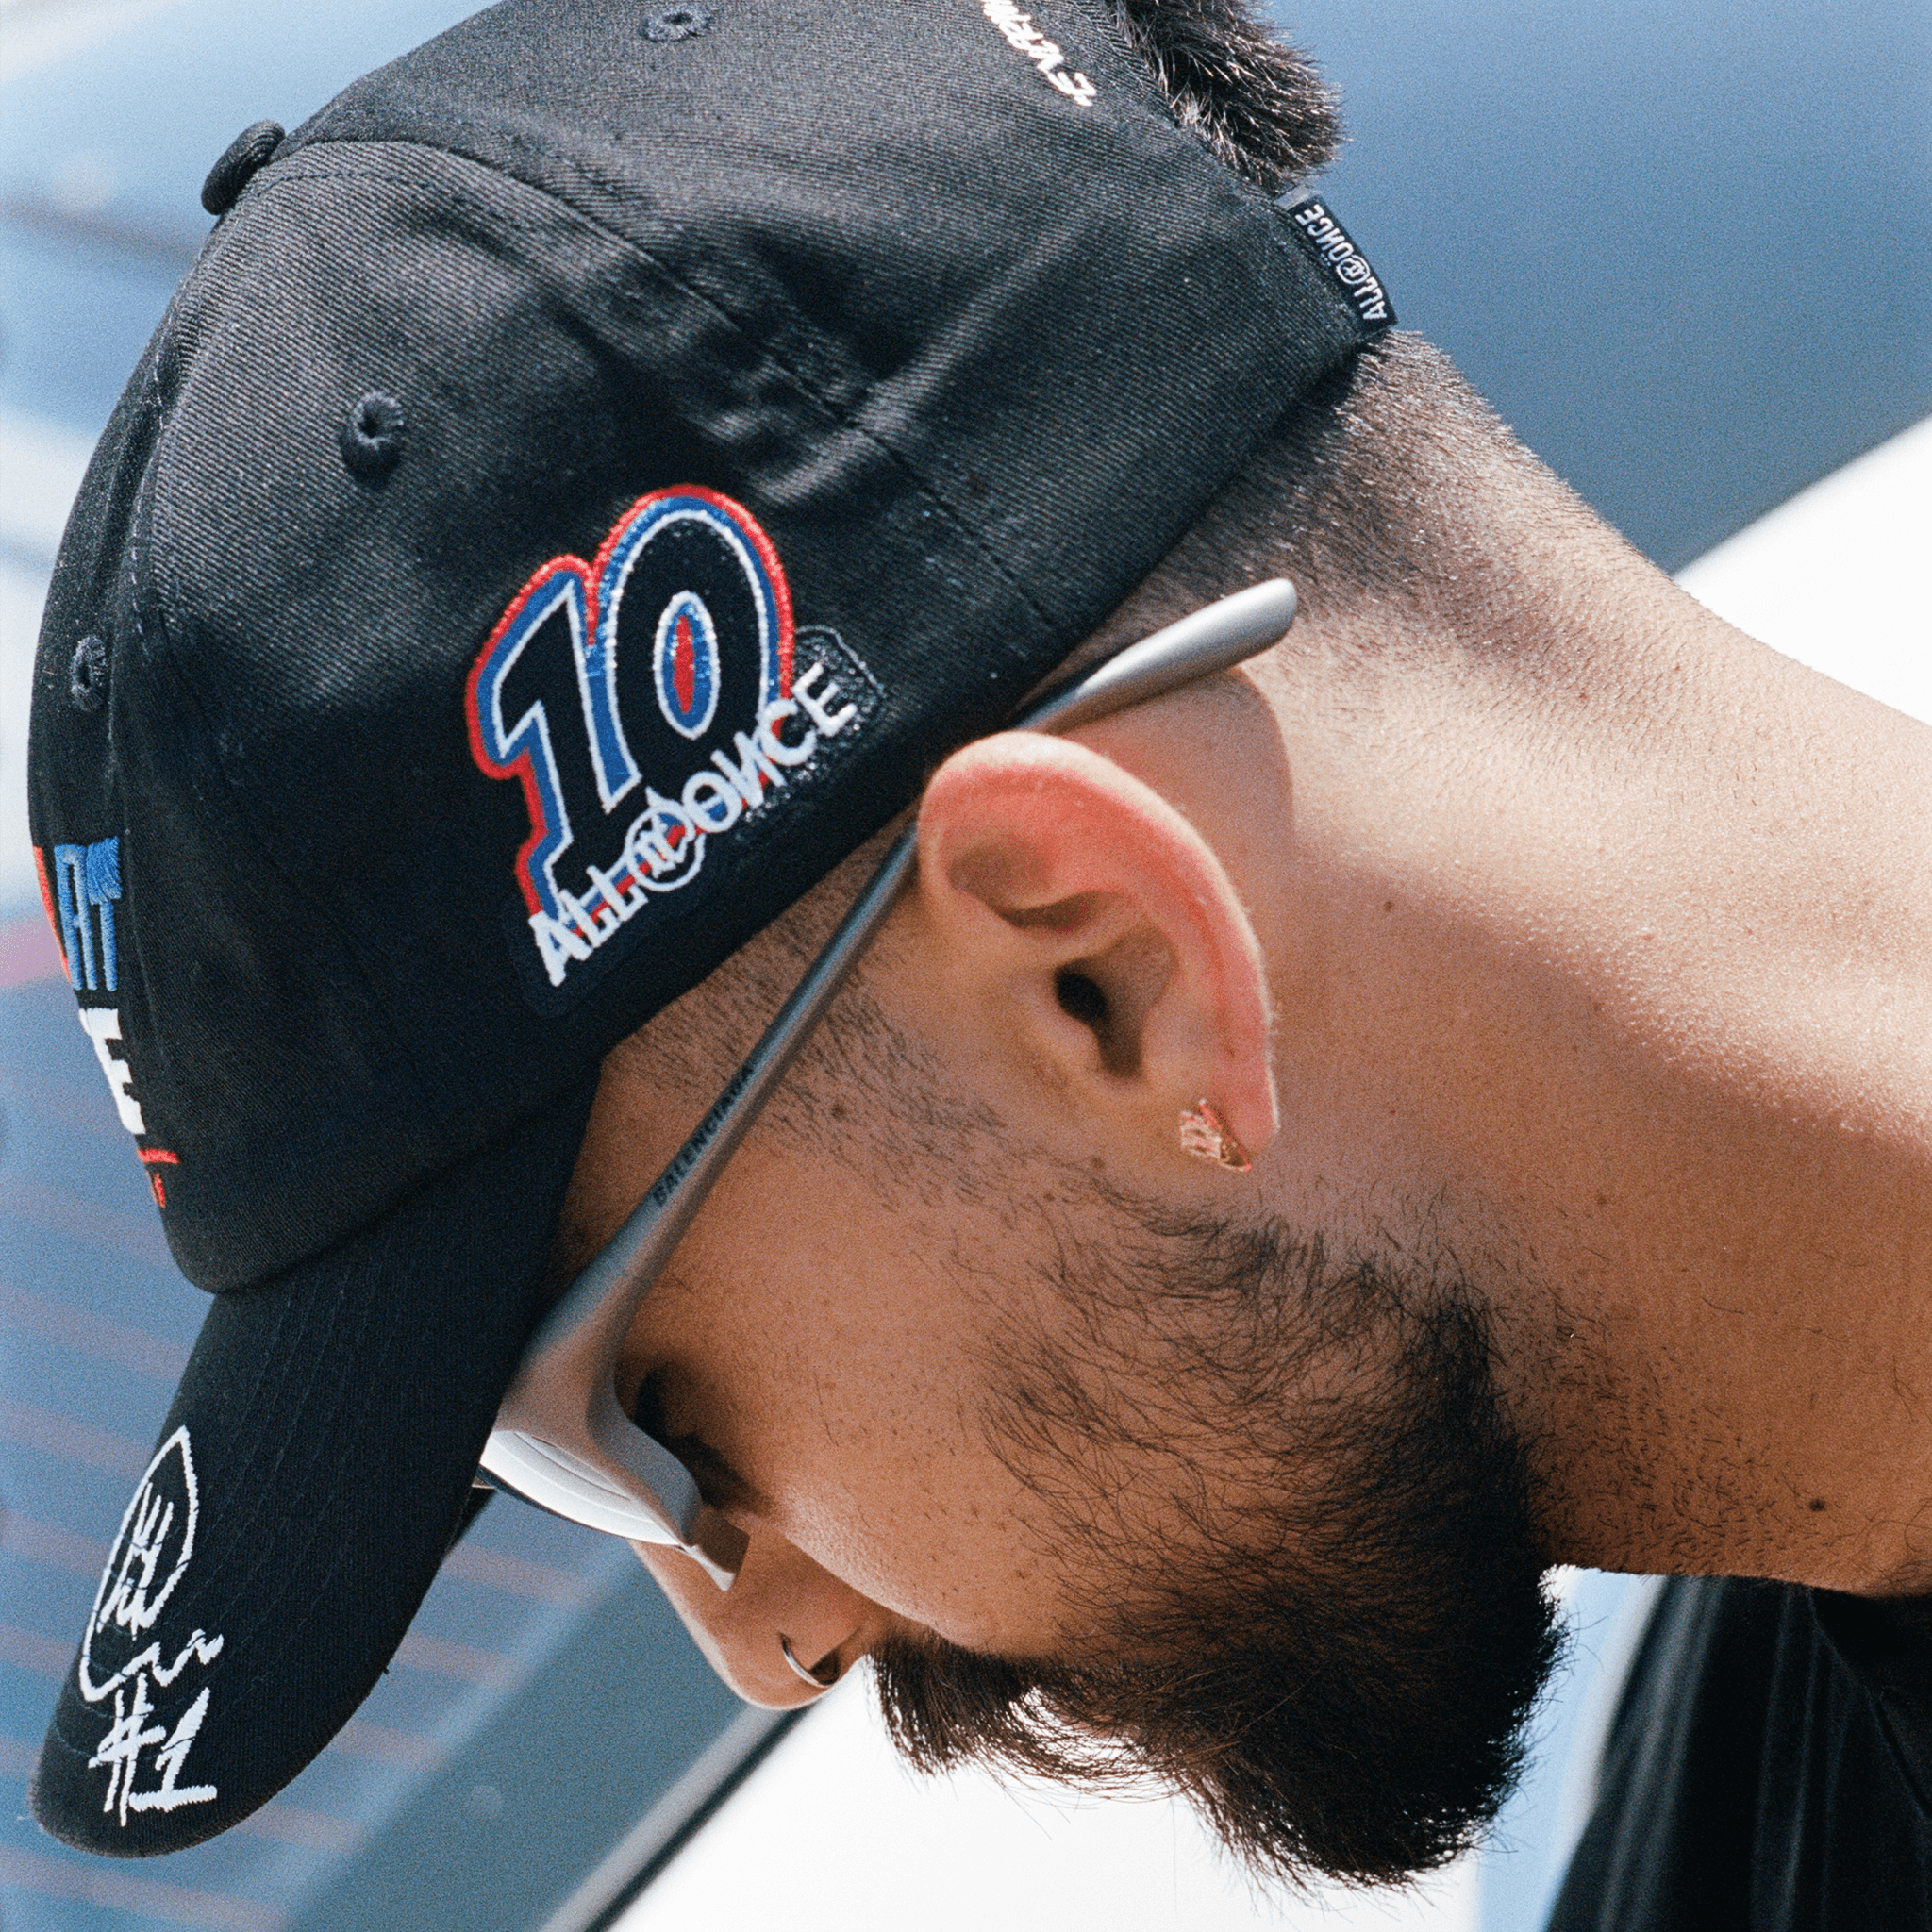 Racing 6-Panel Cap - All@Once